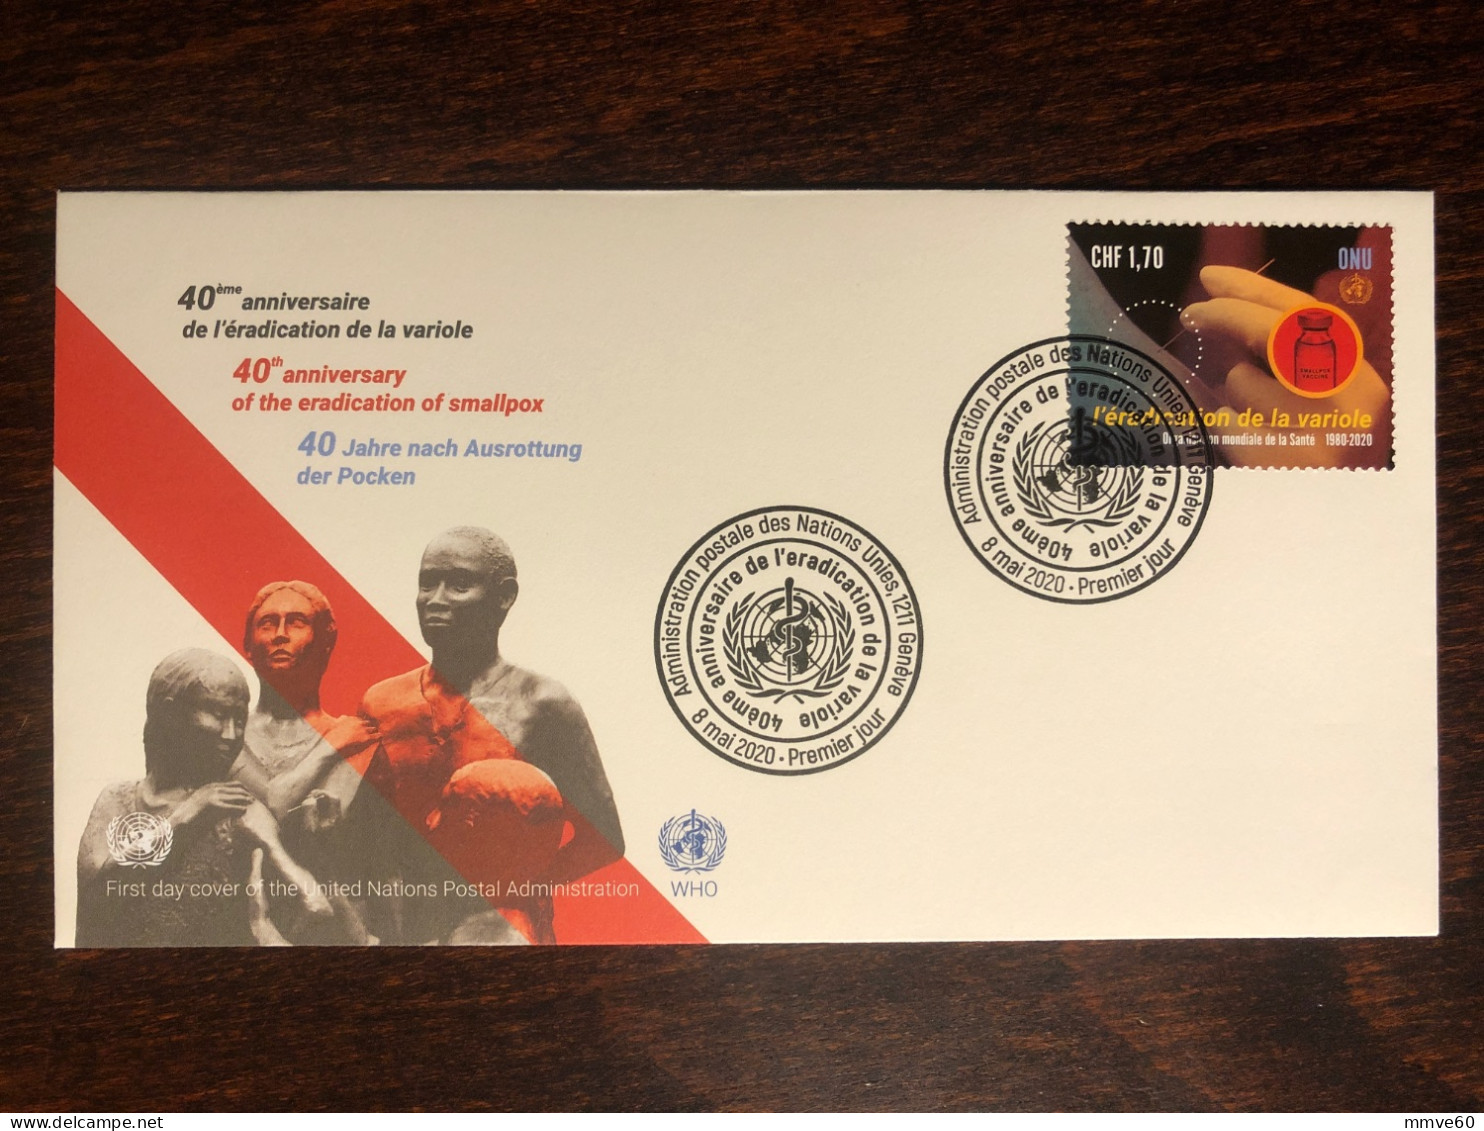 UNITED NATIONS UN UNO GENEVA FDC COVER 2020 YEAR SMALLPOX VARIOLE HEALTH MEDICINE STAMPS - Emissions Communes New York/Genève/Vienne